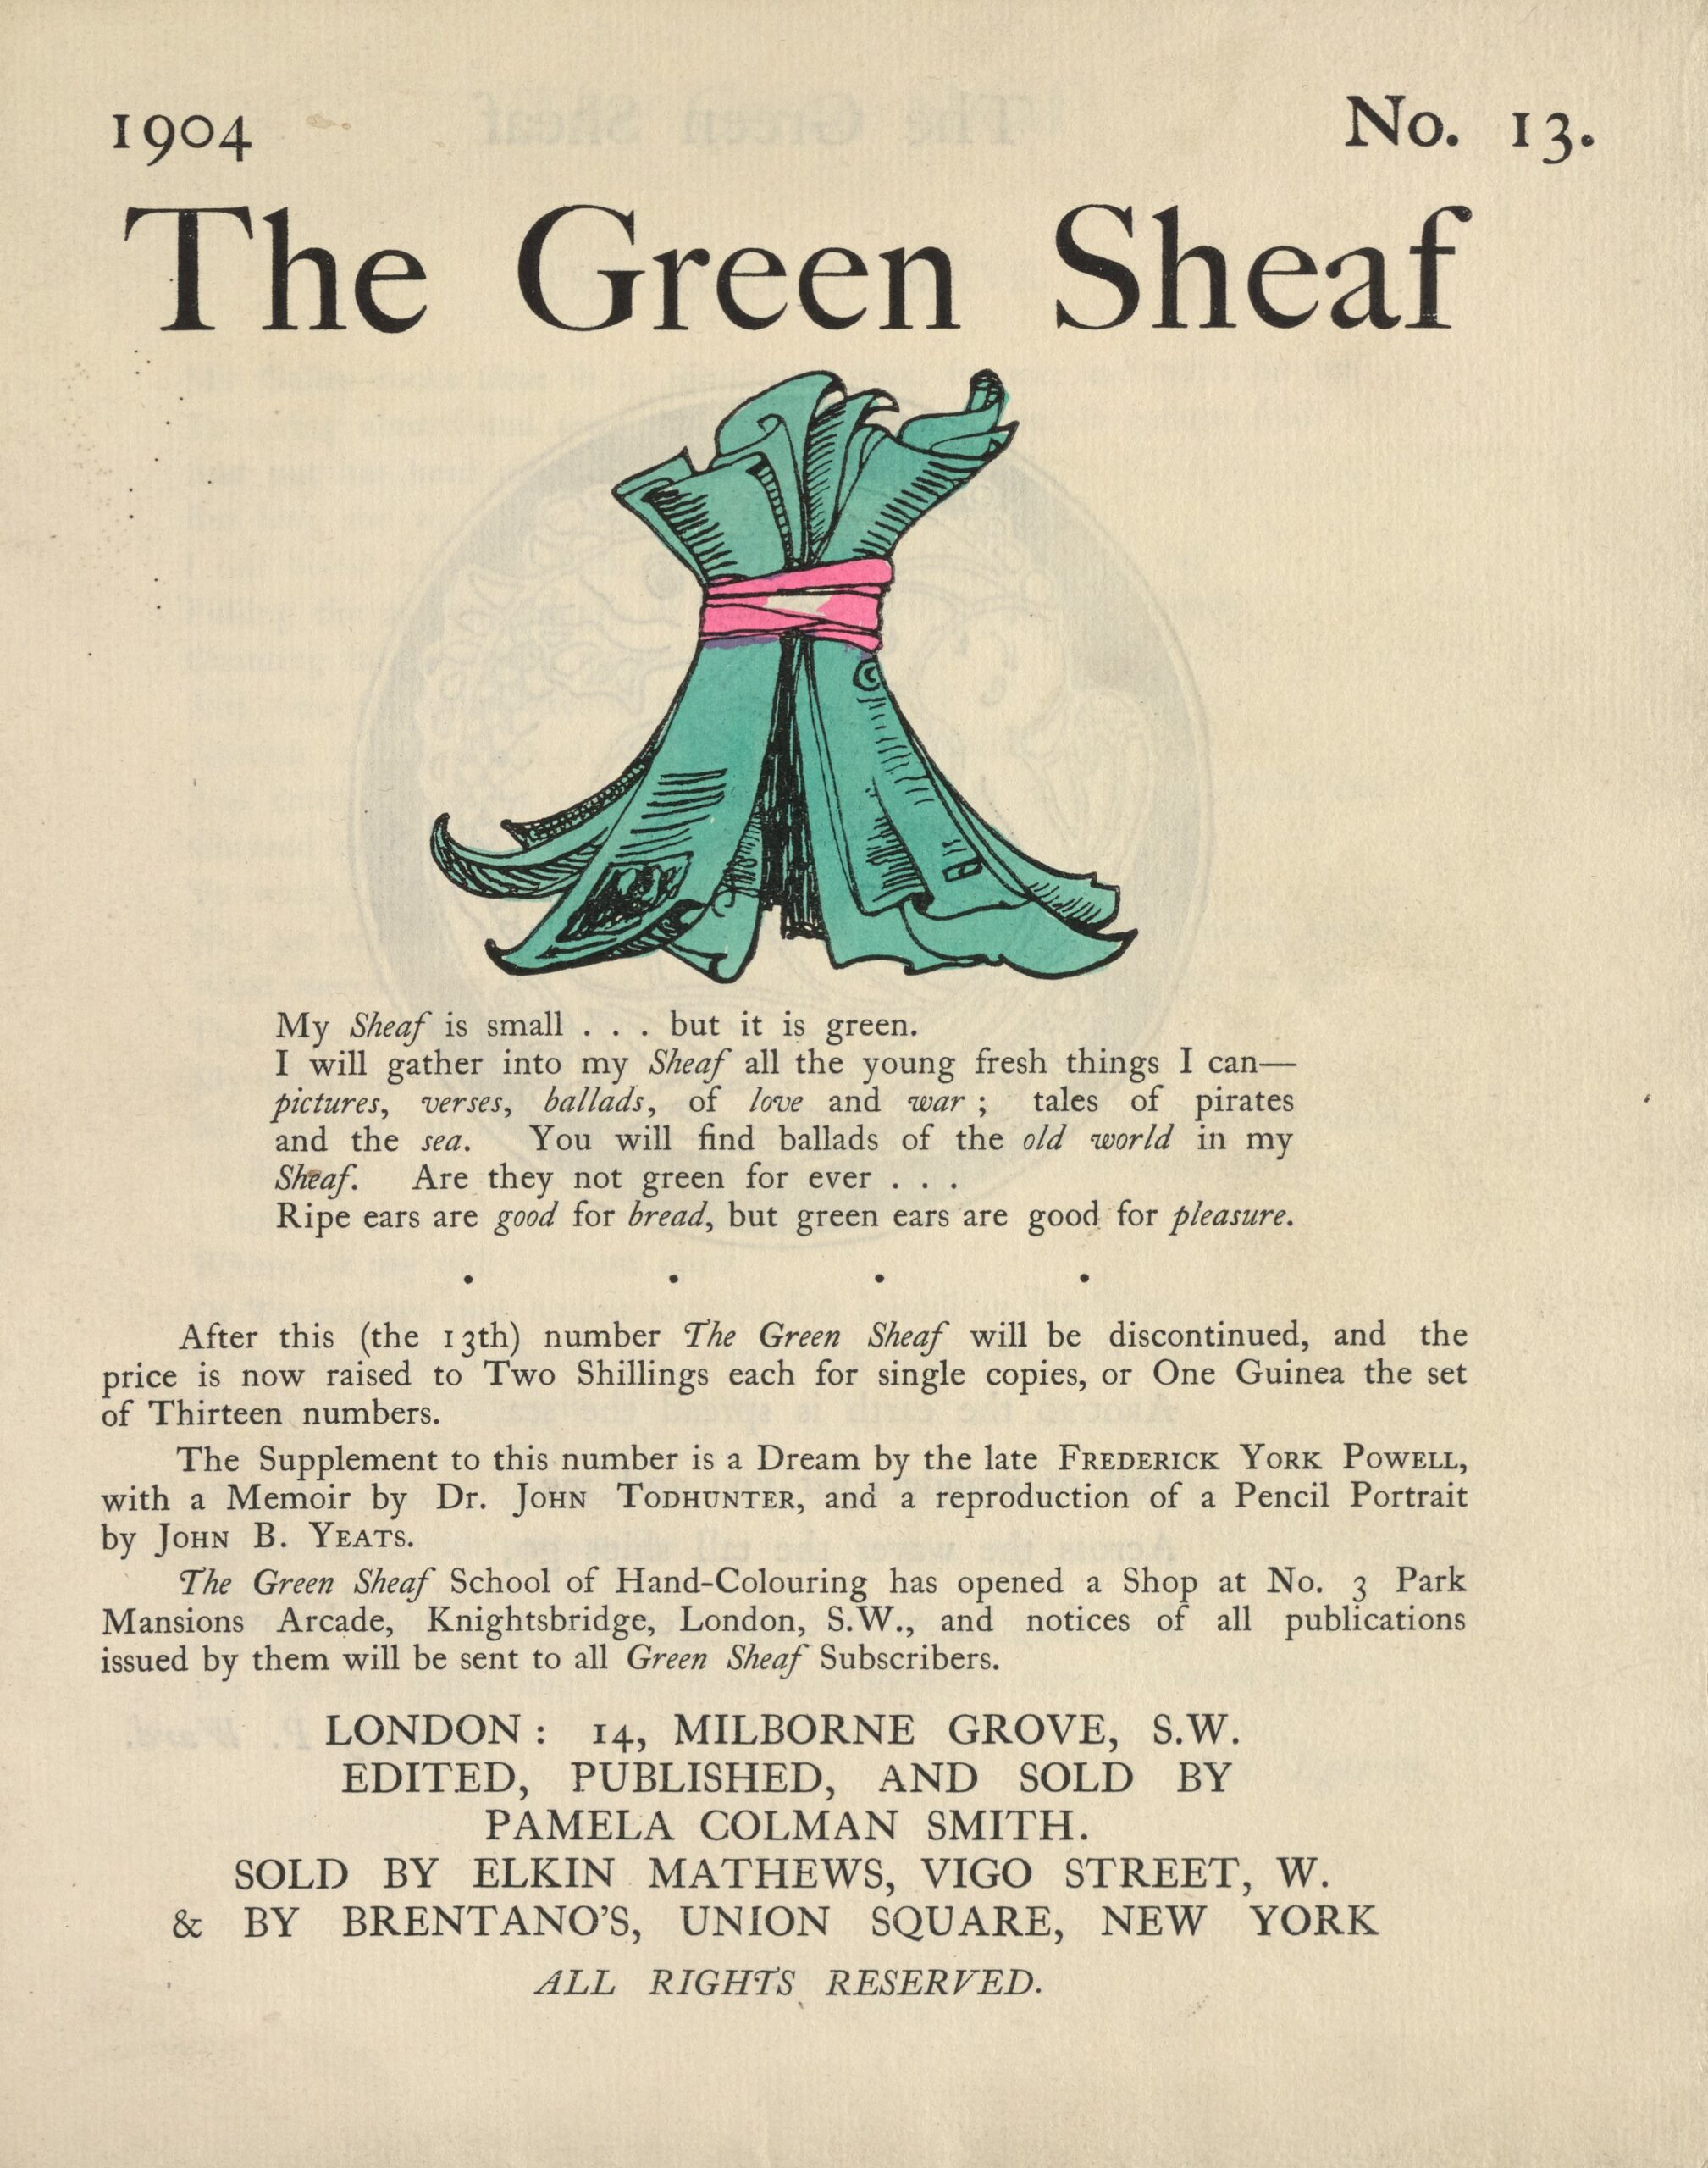 The hand-coloured illustration is centered on the tan page. In the top right corner, the text “No. 13” is printed. Above the illustration, near the top of the page, the text “The Green Sheaf” is printed in black ink in a large serif font. Next follows the illustration of green-coloured printed and illustrated pages, tied together in a sheaf with a red ribbon. The artist’s initialed signature “PCS” is visible on one of the pages. Below the illustration, centered on the page, is the year, 1904, followed, in slightly smaller text, by Smith’s manifesto, first printed at the back of the first volume of The Green Sheaf “My Sheaf is small… but it is green. / I will gather into my Sheaf all the fresh young things I can—pictures, / verses, ballads, of love and war; tales of pirates and the sea. / You will find ballads of the old world in my Sheaf. Are they not / green for ever… / Ripe ears are good for bread, but green ears are good for pleasure.” Beneath this is printed: “After this (the 13th) number The Green Sheaf will be discontinued, and the / price is now raised to Two Shillings each for single copies, or One Guinea the set / of Thirteen numbers. / The Supplement to this number is a Dream by the late Frederick York Powell, / with a Memoir by Dr. John Todhunter, and a reproduction of a Pencil Portrait / by John B. Yeats. / The Green Sheaf School of Hand-Colouring has opened a Shop at No. 3 Park / Mansions Arcade, Knightsbridge, London, S.W., and notices of all publications / issued by them will be sent to all Green Sheaf Subscribers.” Below this is the magazine’s printing information, centred: “LONDON / EDITED, PUBLISHED AND SOLD BY / PAMELA COLMAN SMITH / & SOLD BY ELKIN MATHEWS, VIGO STREET, W. / & BY BRENTANO’S, UNION SQUARE, NEW YORK. / ALL RIGHTS RESERVED.”